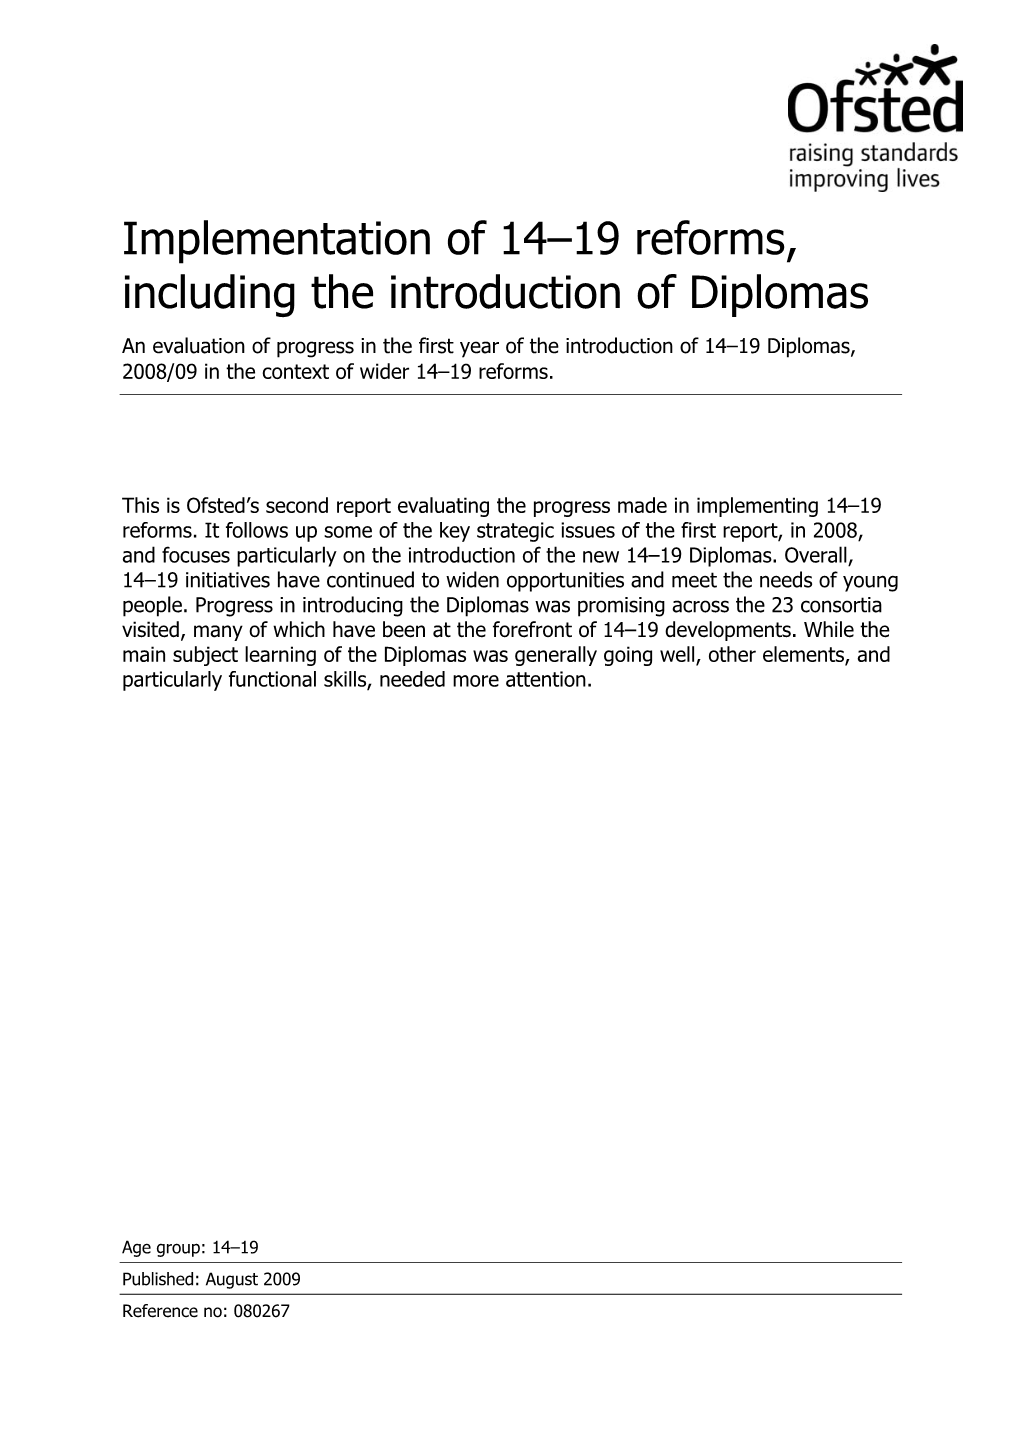 Implementation of 14–19 Reforms, Including the Introduction of Diplomas